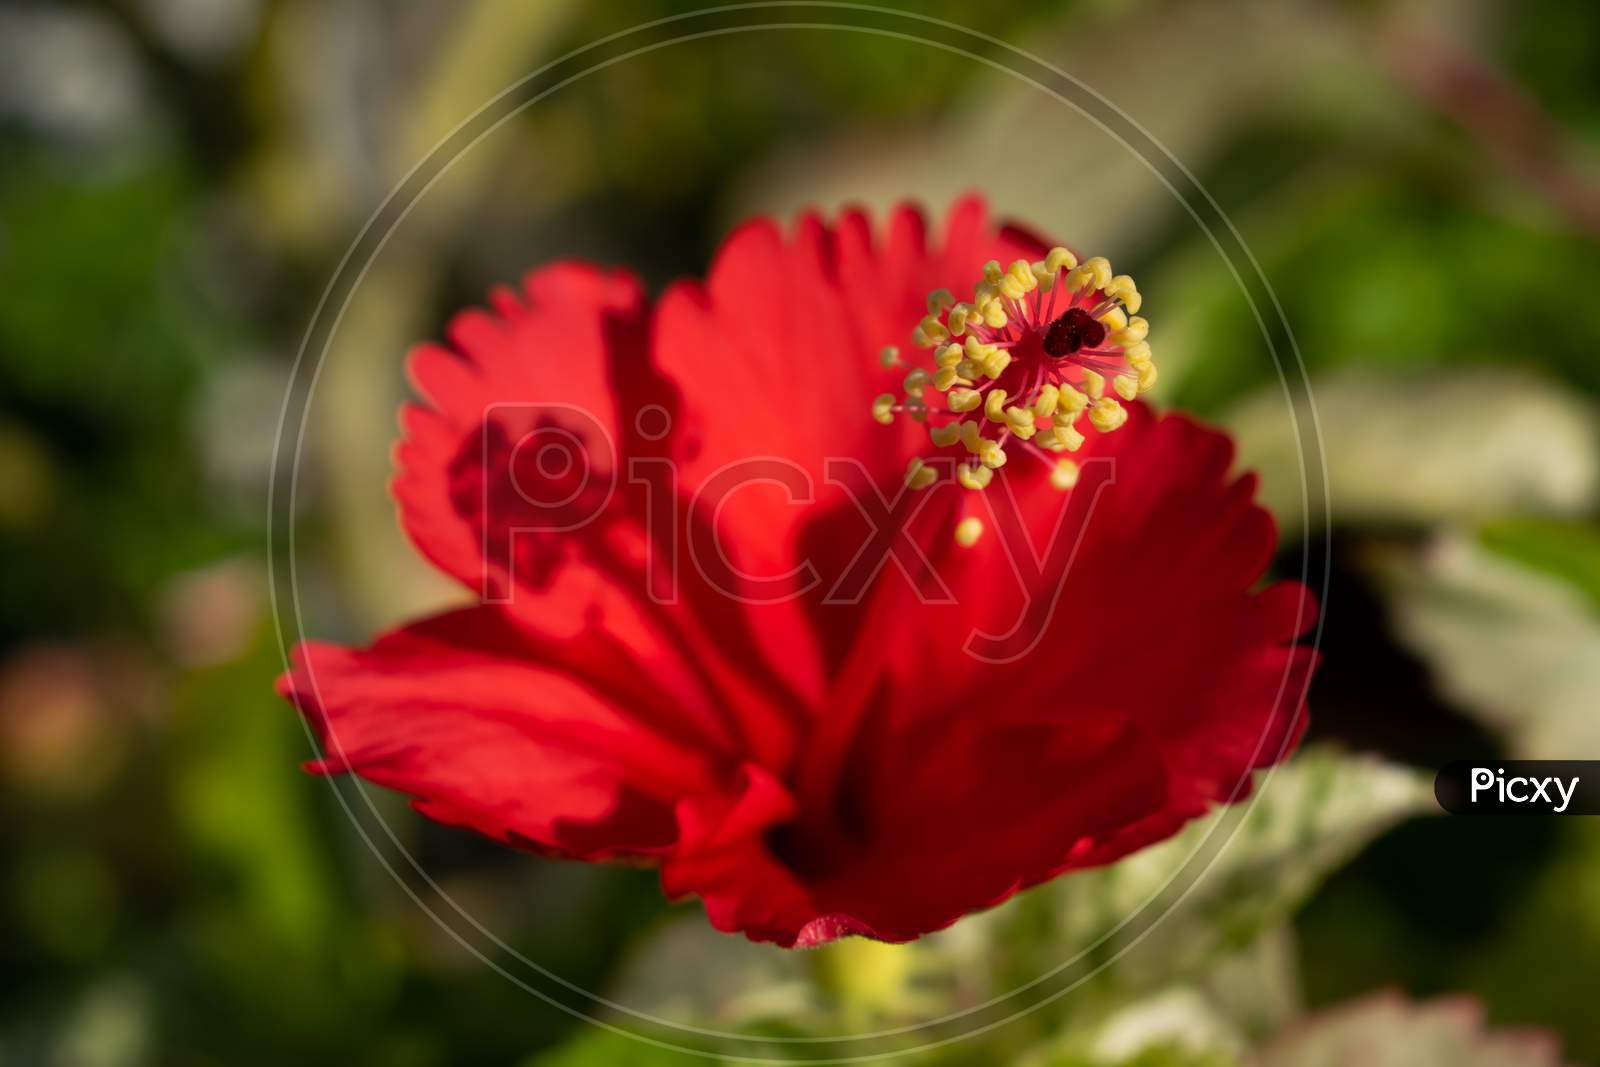 Red Hibiscus flower blooming close up, focus on stamen, India